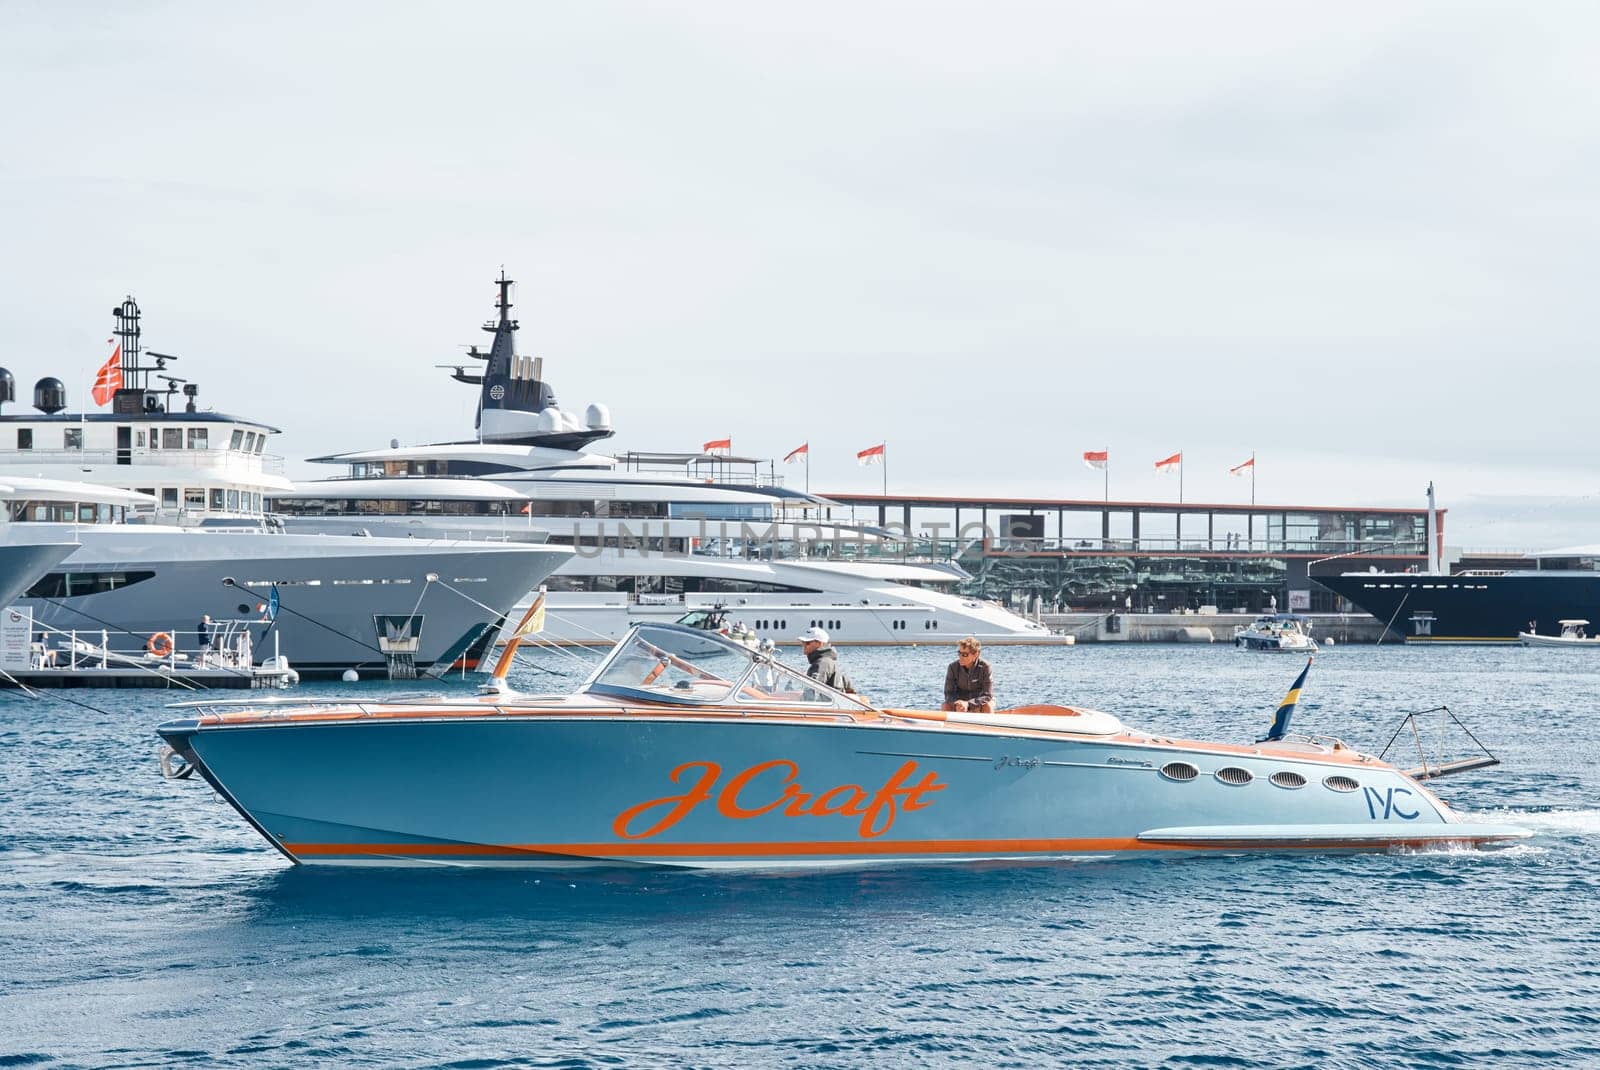 Monaco, Monte Carlo, 29 September 2022 - Water taxi by luxury motorboat on the famous yacht exhibition, a lot of most expensive luxury yachts, richest people, yacht brokers, boat traffic by vladimirdrozdin